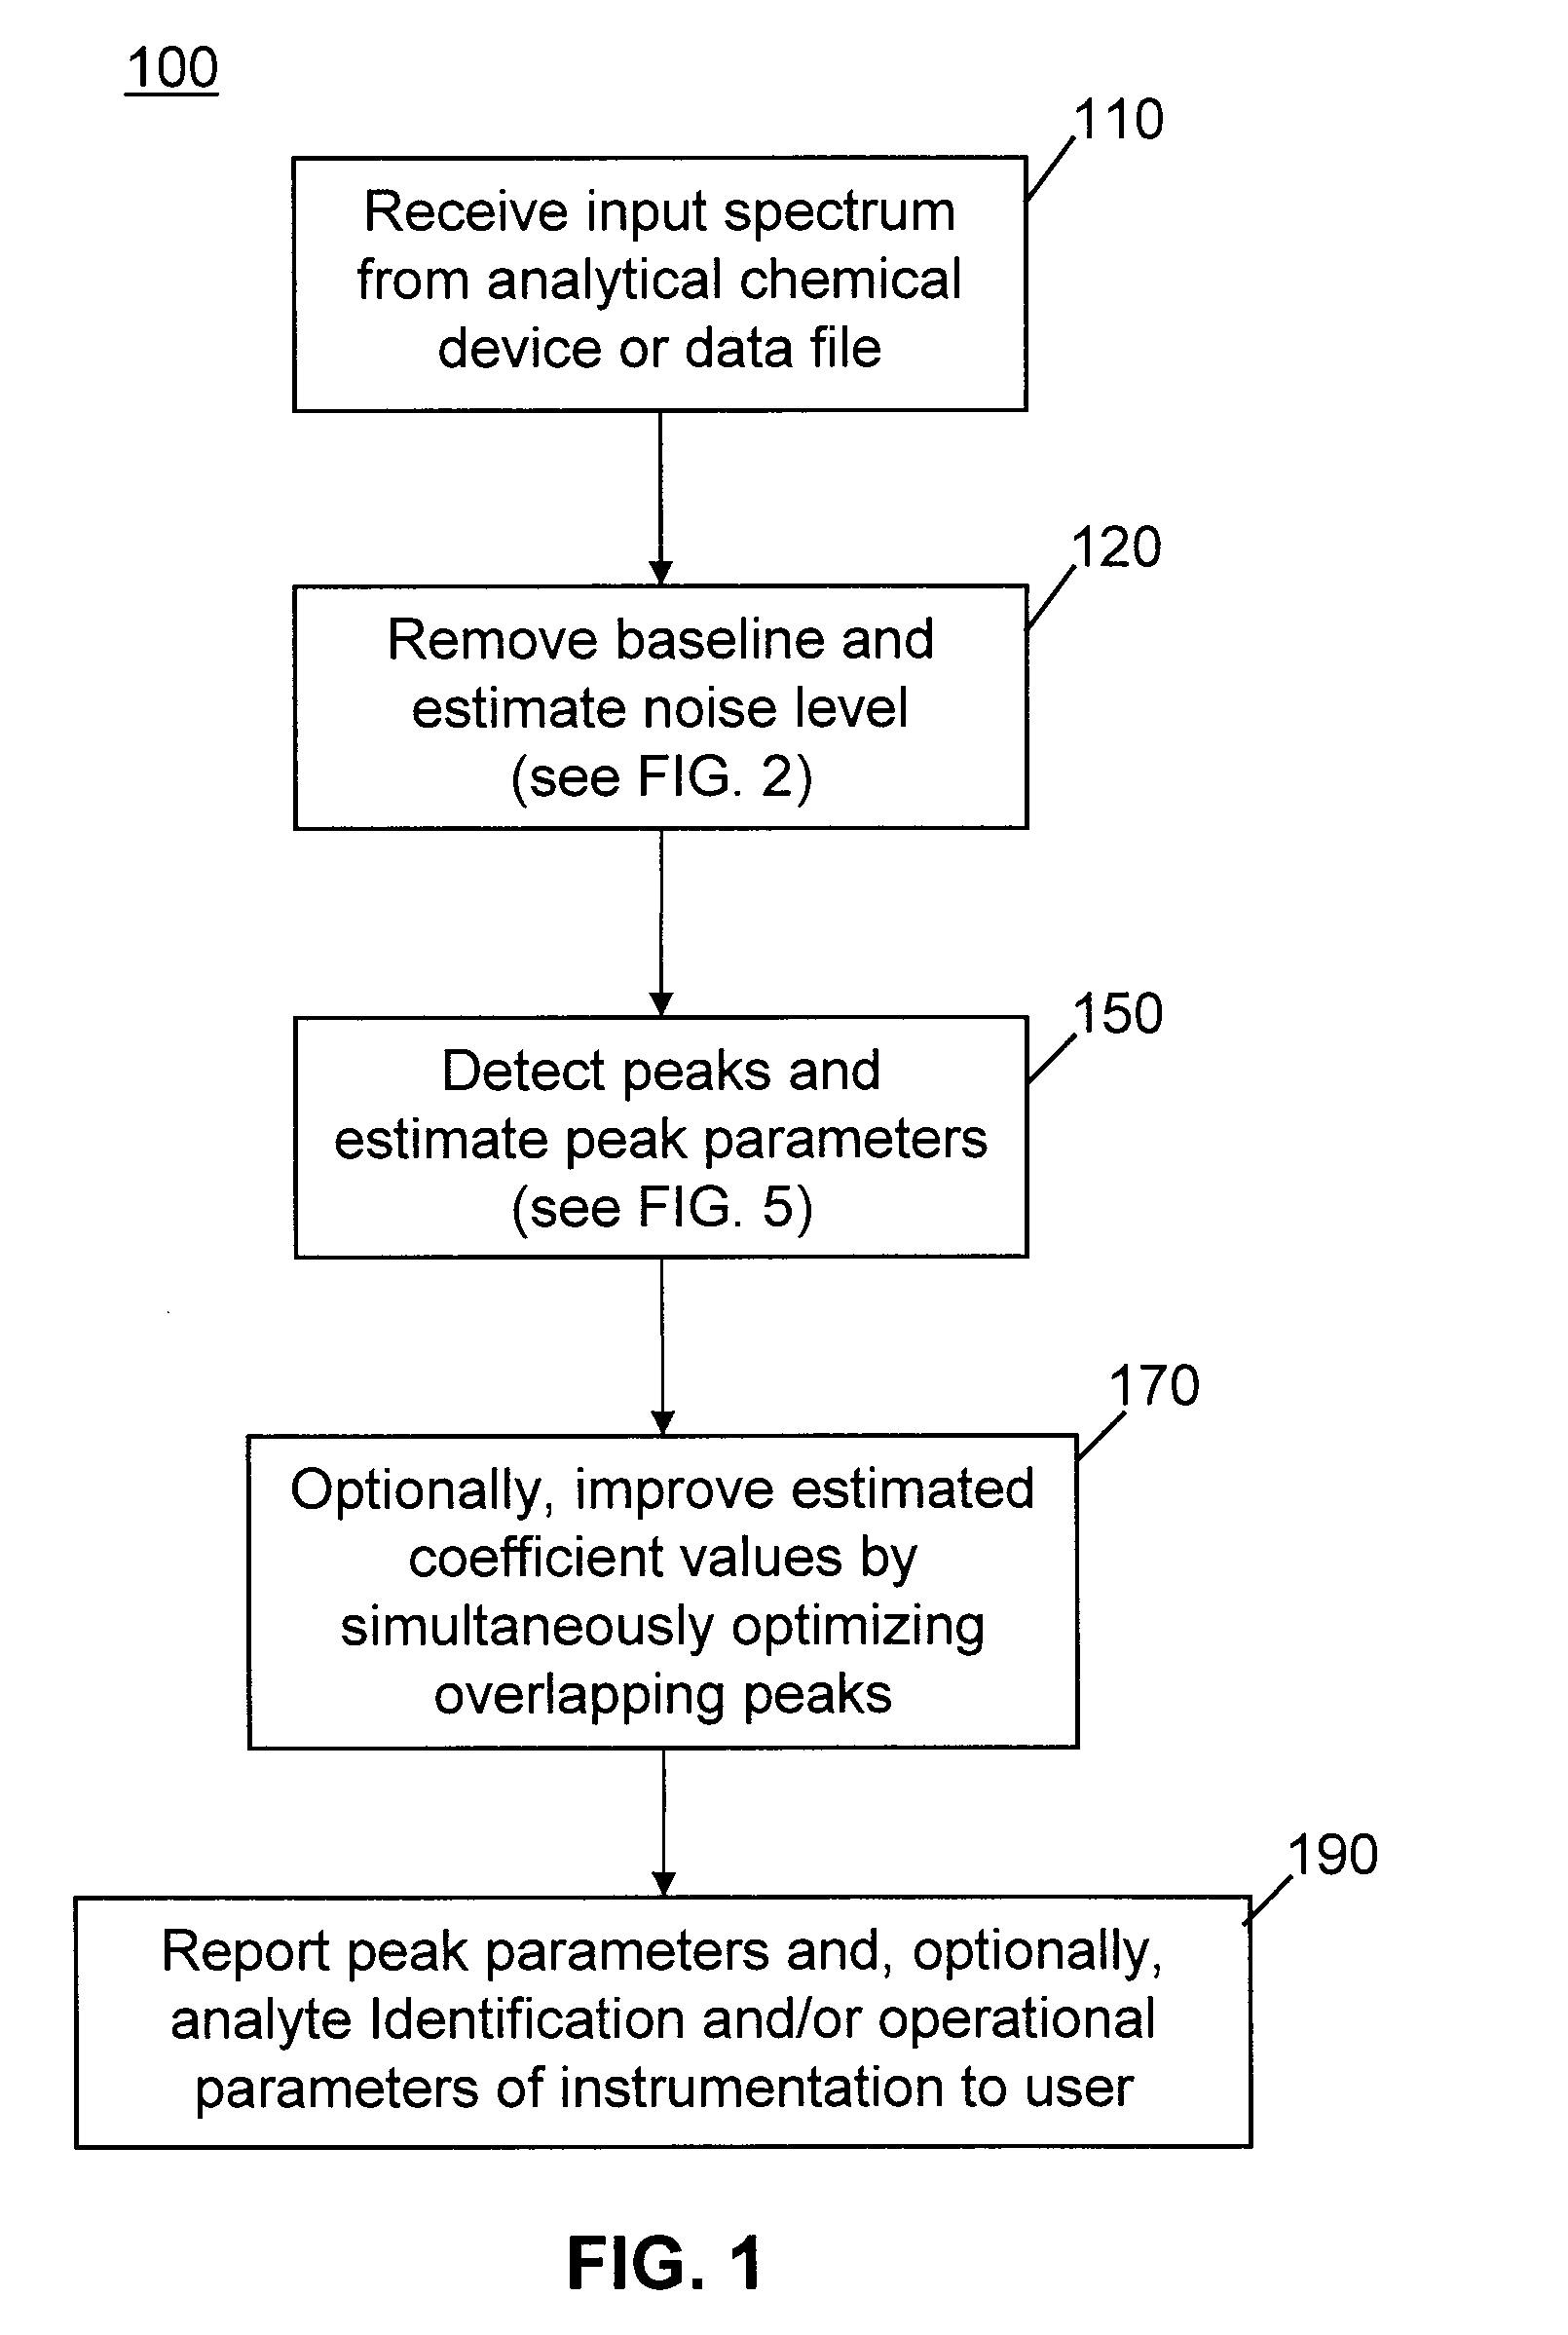 Methods of automated spectral peak detection and quantification without user input